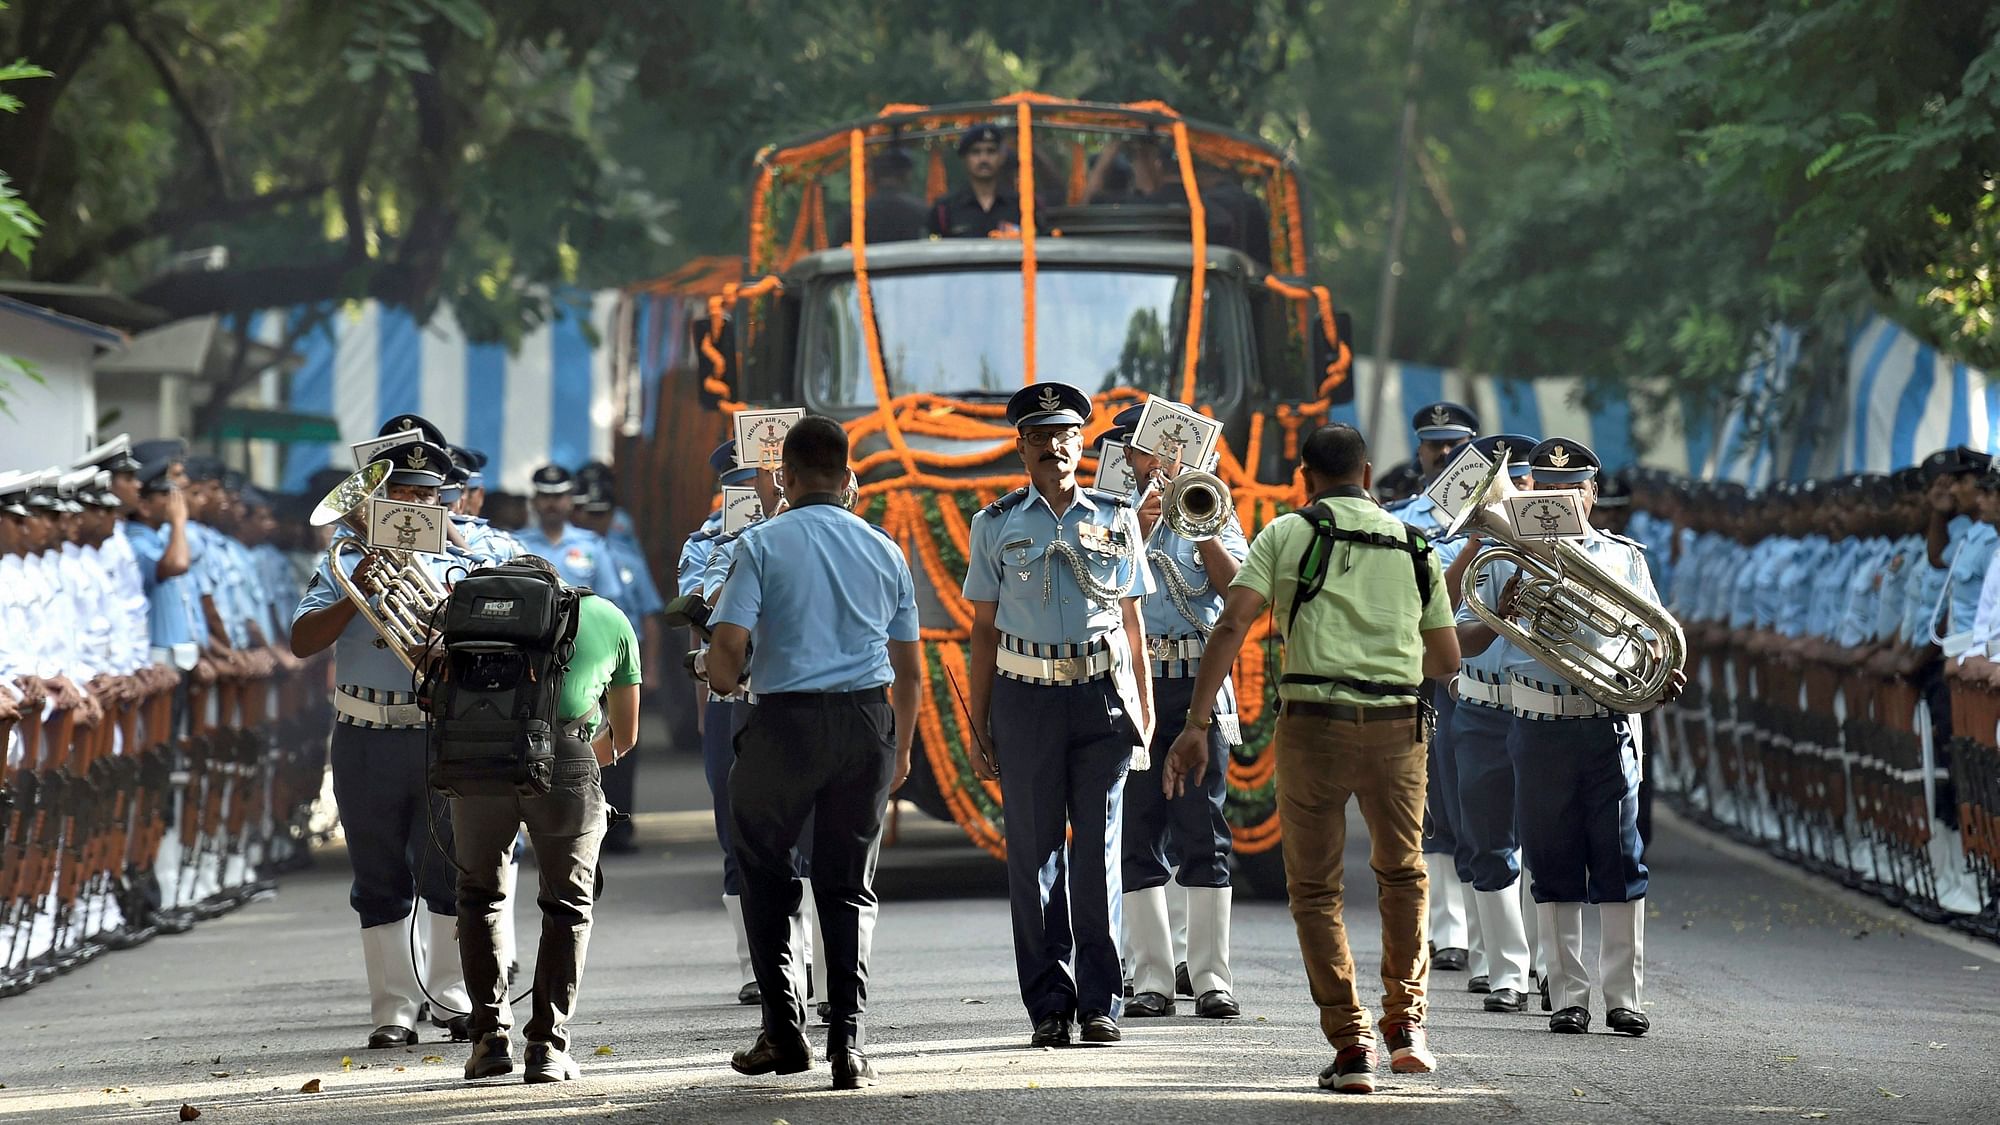 Defence personnel accompany the procession for the state funeral of Marshal of the Indian Air Force Arjan Singh